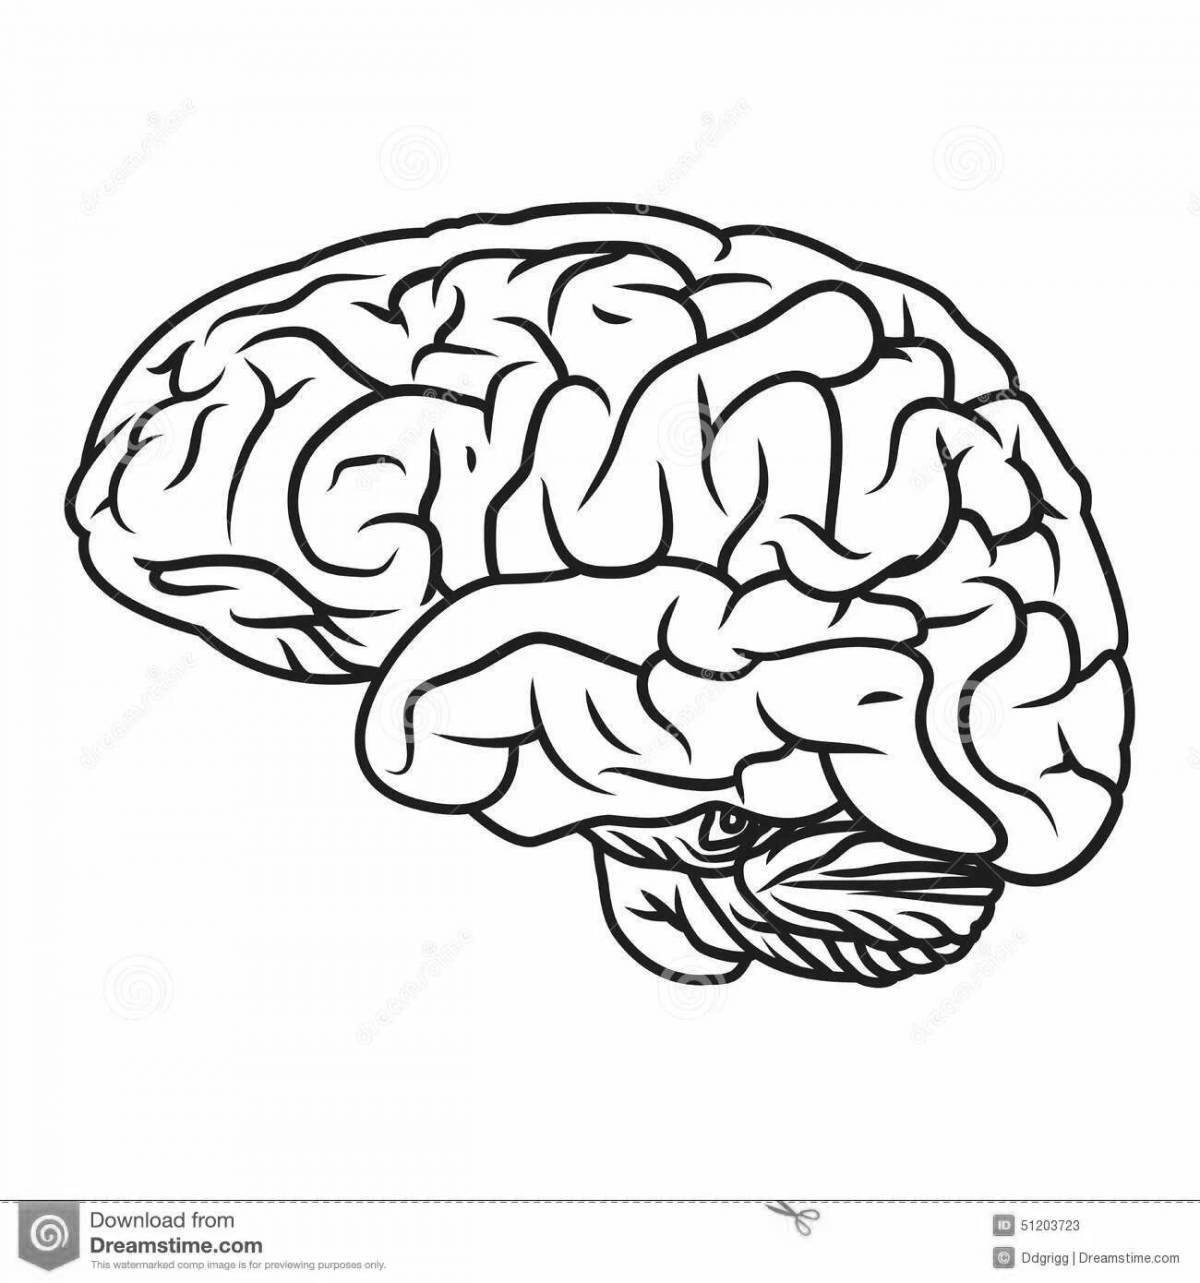 Exciting brain development coloring book